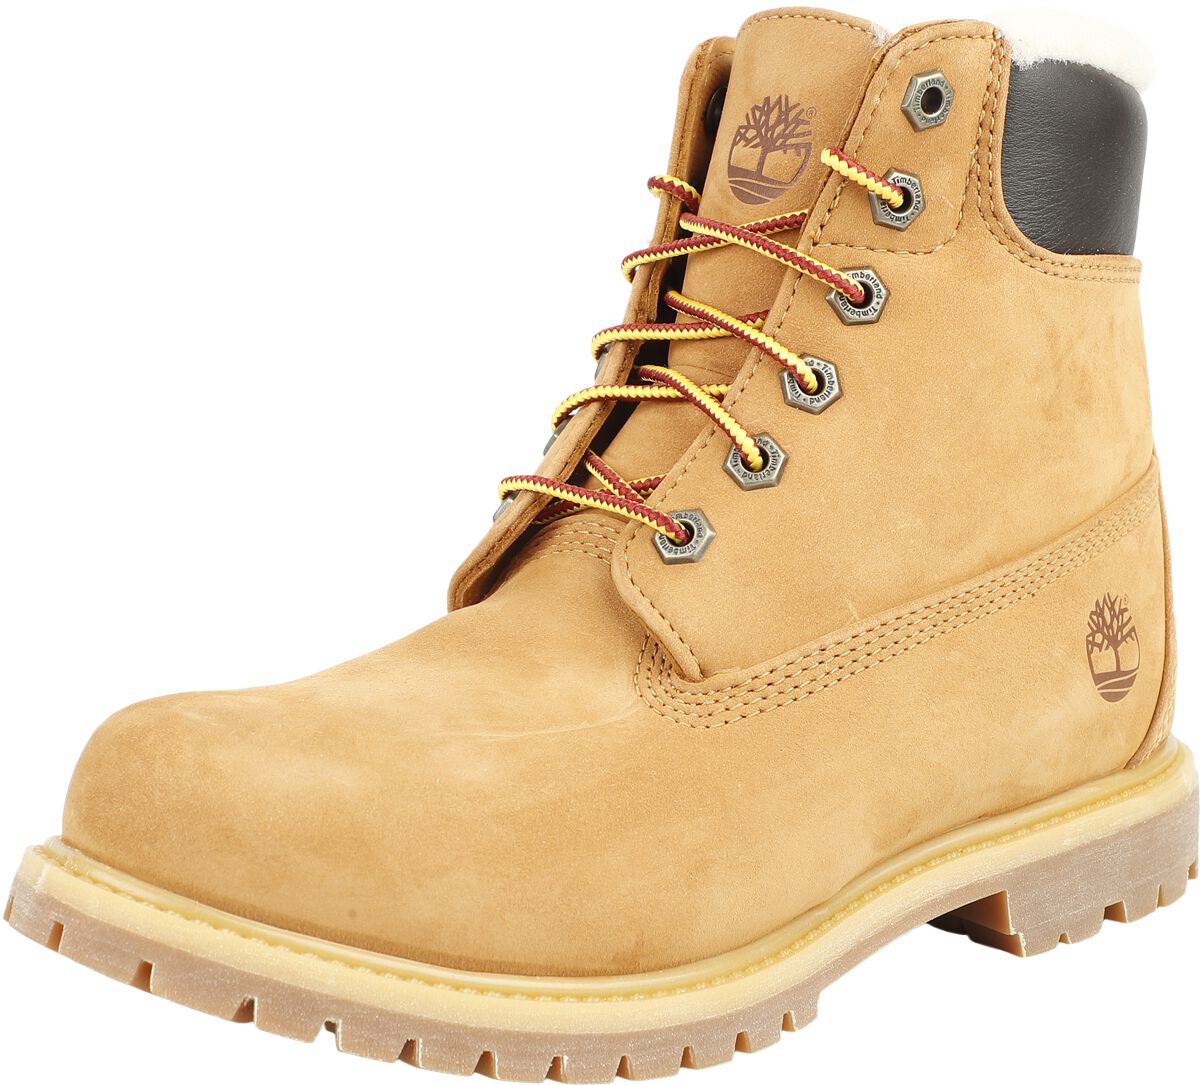 Timberland 6 Inch Premium Shearling Lined WP Boot Boot braun in EU39